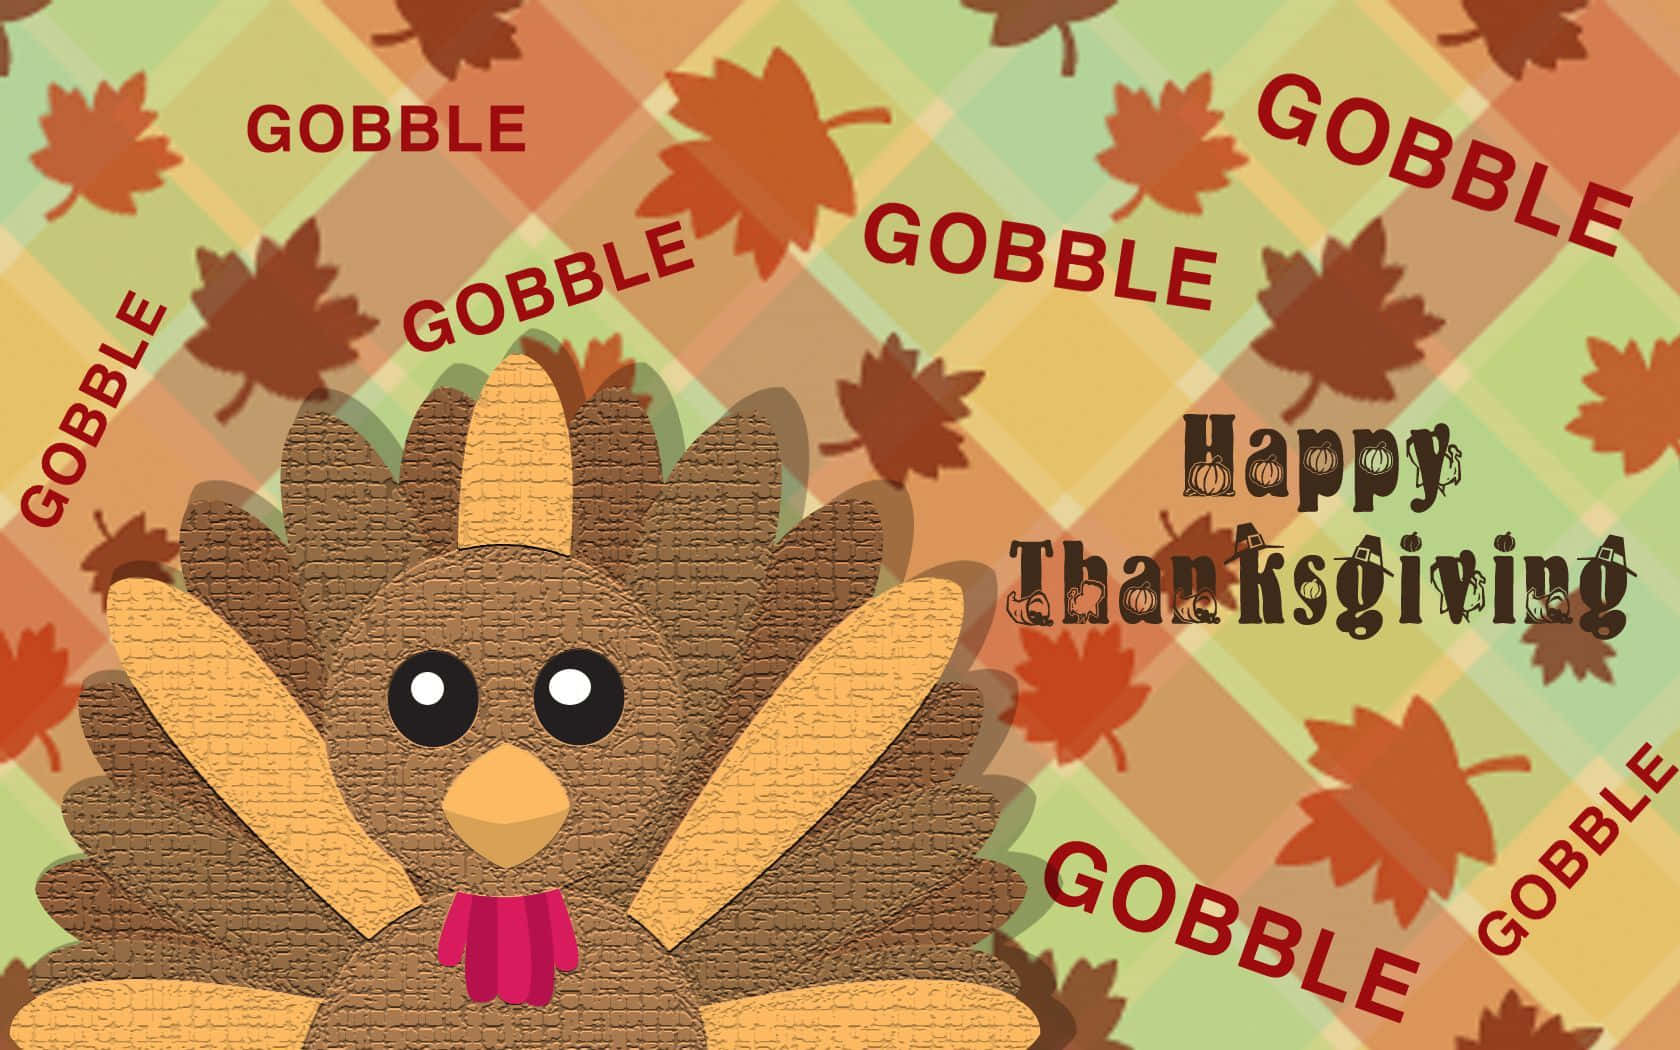 "Make sure you have enough turkey for everyone in your Thanksgiving feast!" Wallpaper